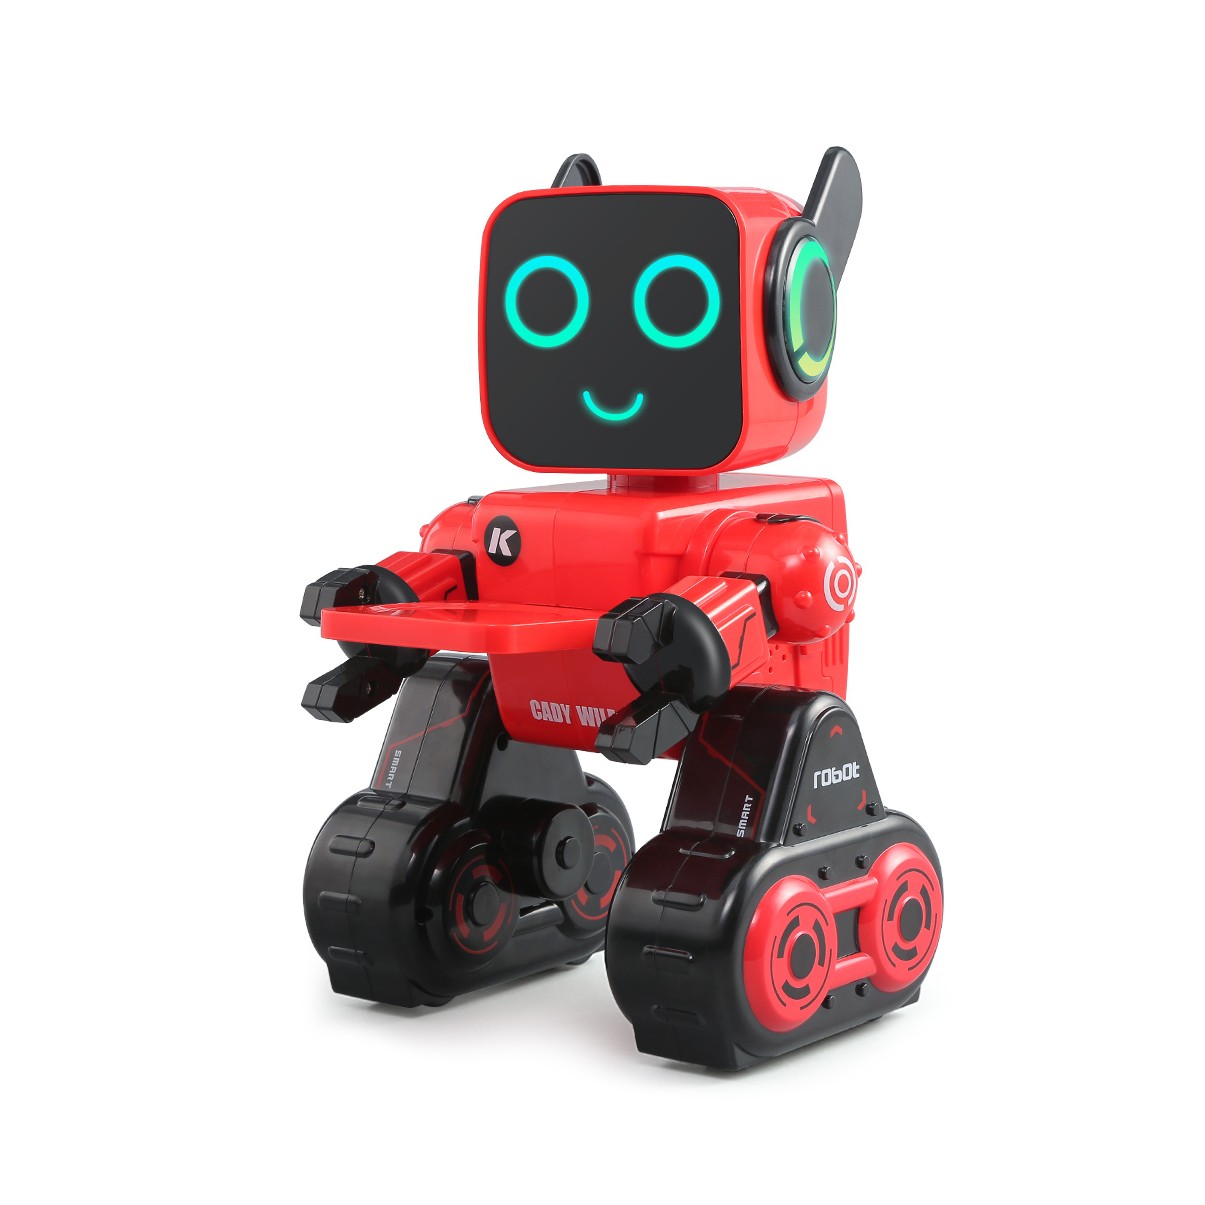 Dropshipping Coolerstuff JJRC R4 Cady Wile Programming Robot Baby Toy